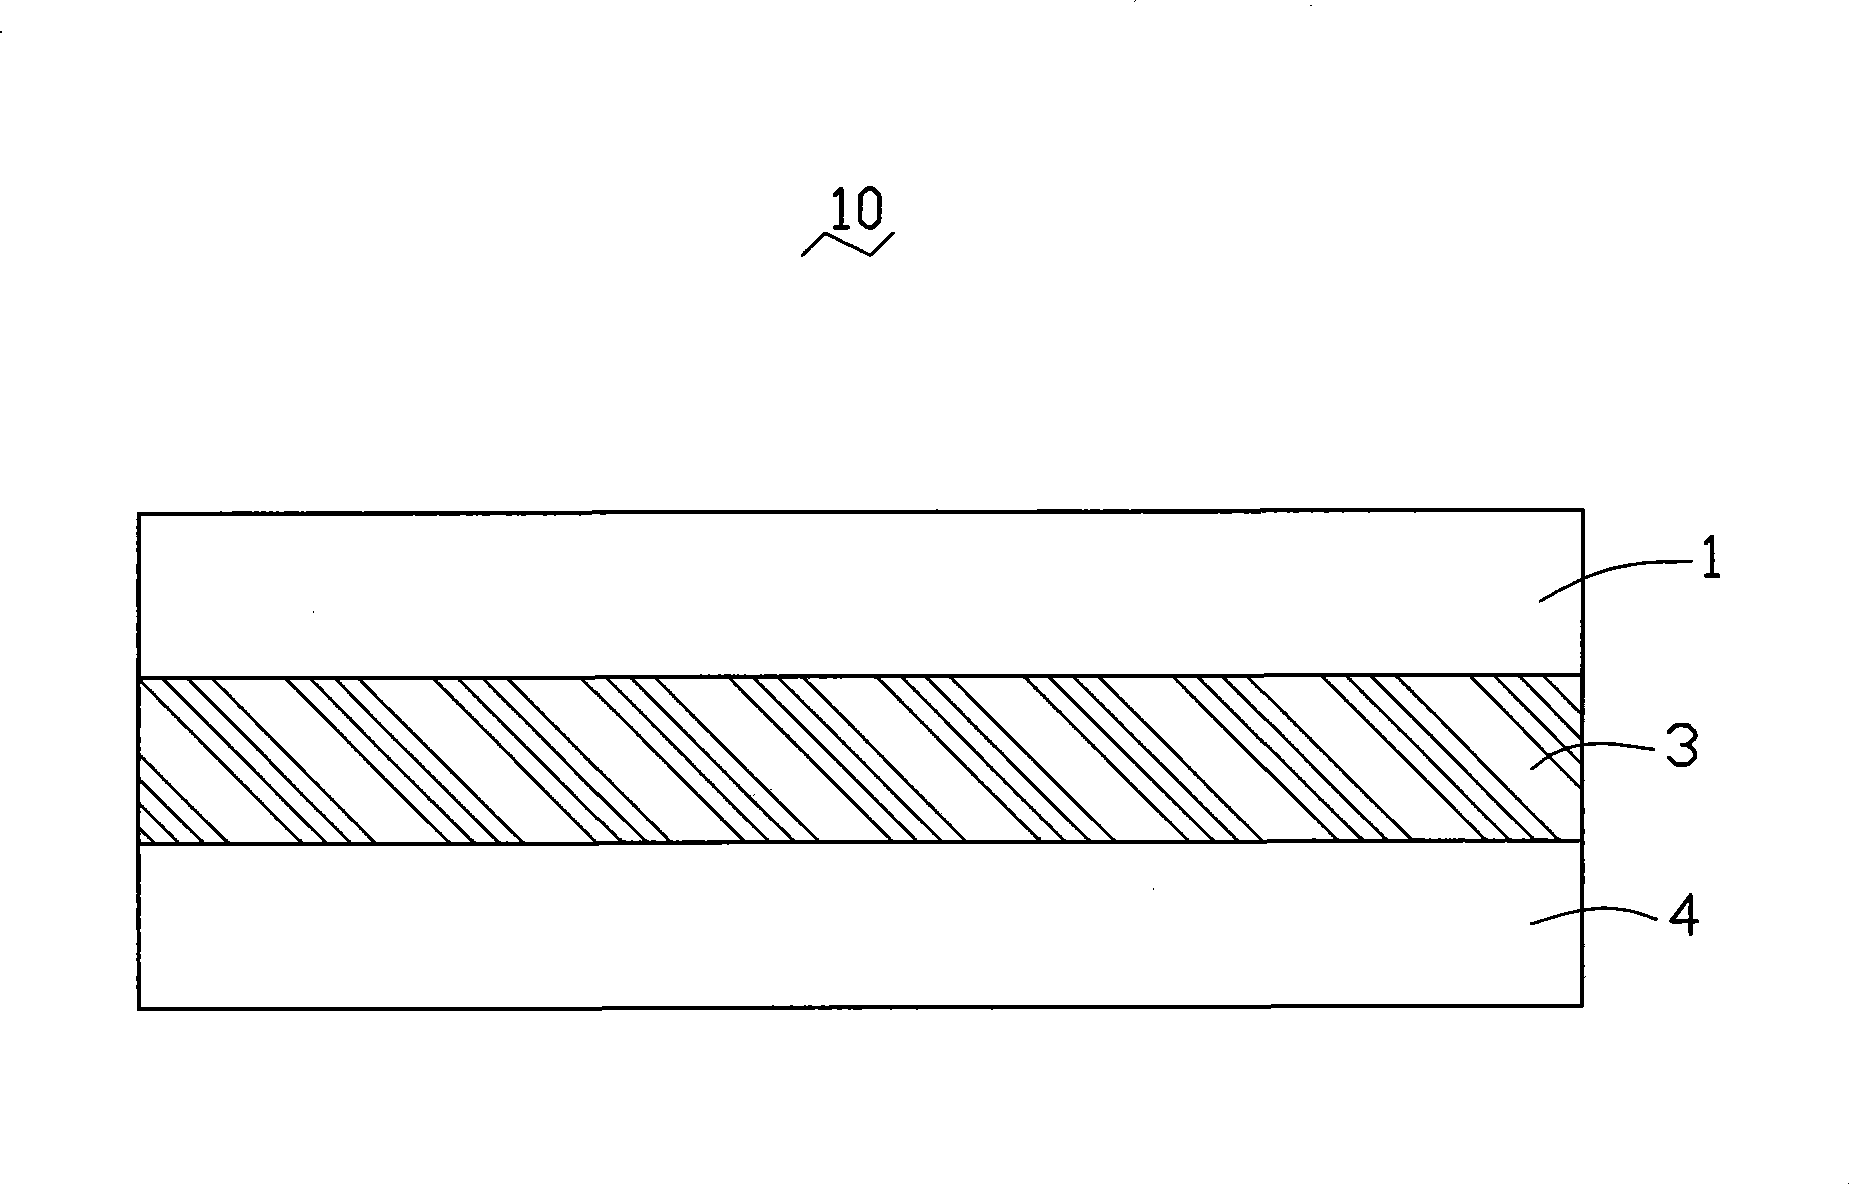 Copper coated substrate material and flexible circuit board having the copper coated substrate material